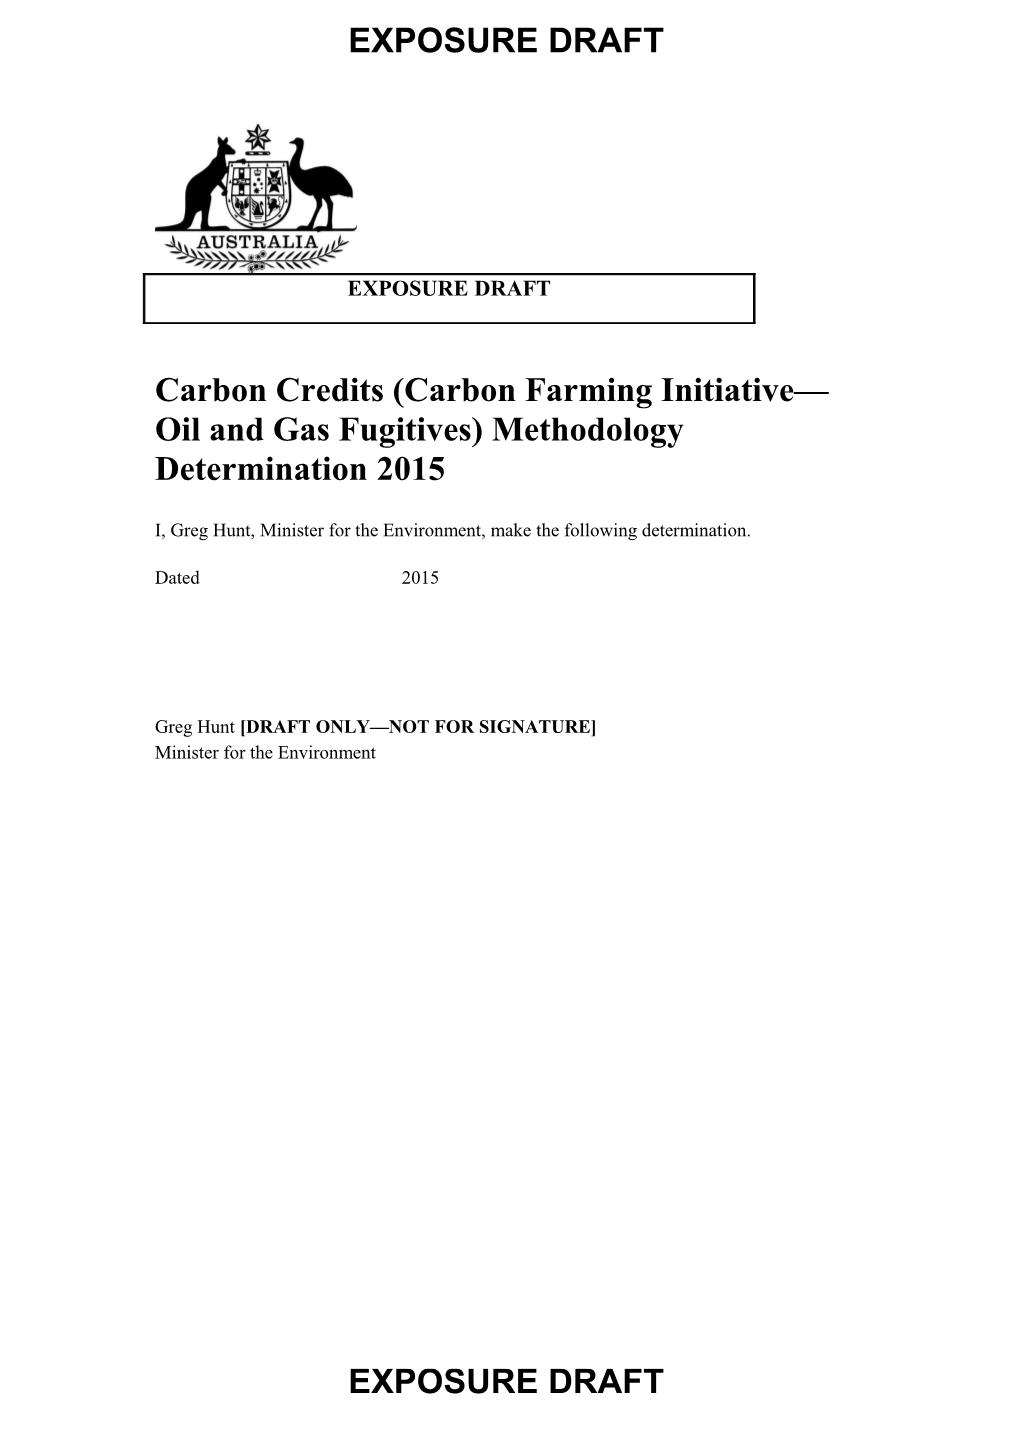 Carbon Credits (Carbon Farming Initiative Oil and Gas Fugitives) Methodology Determination2015